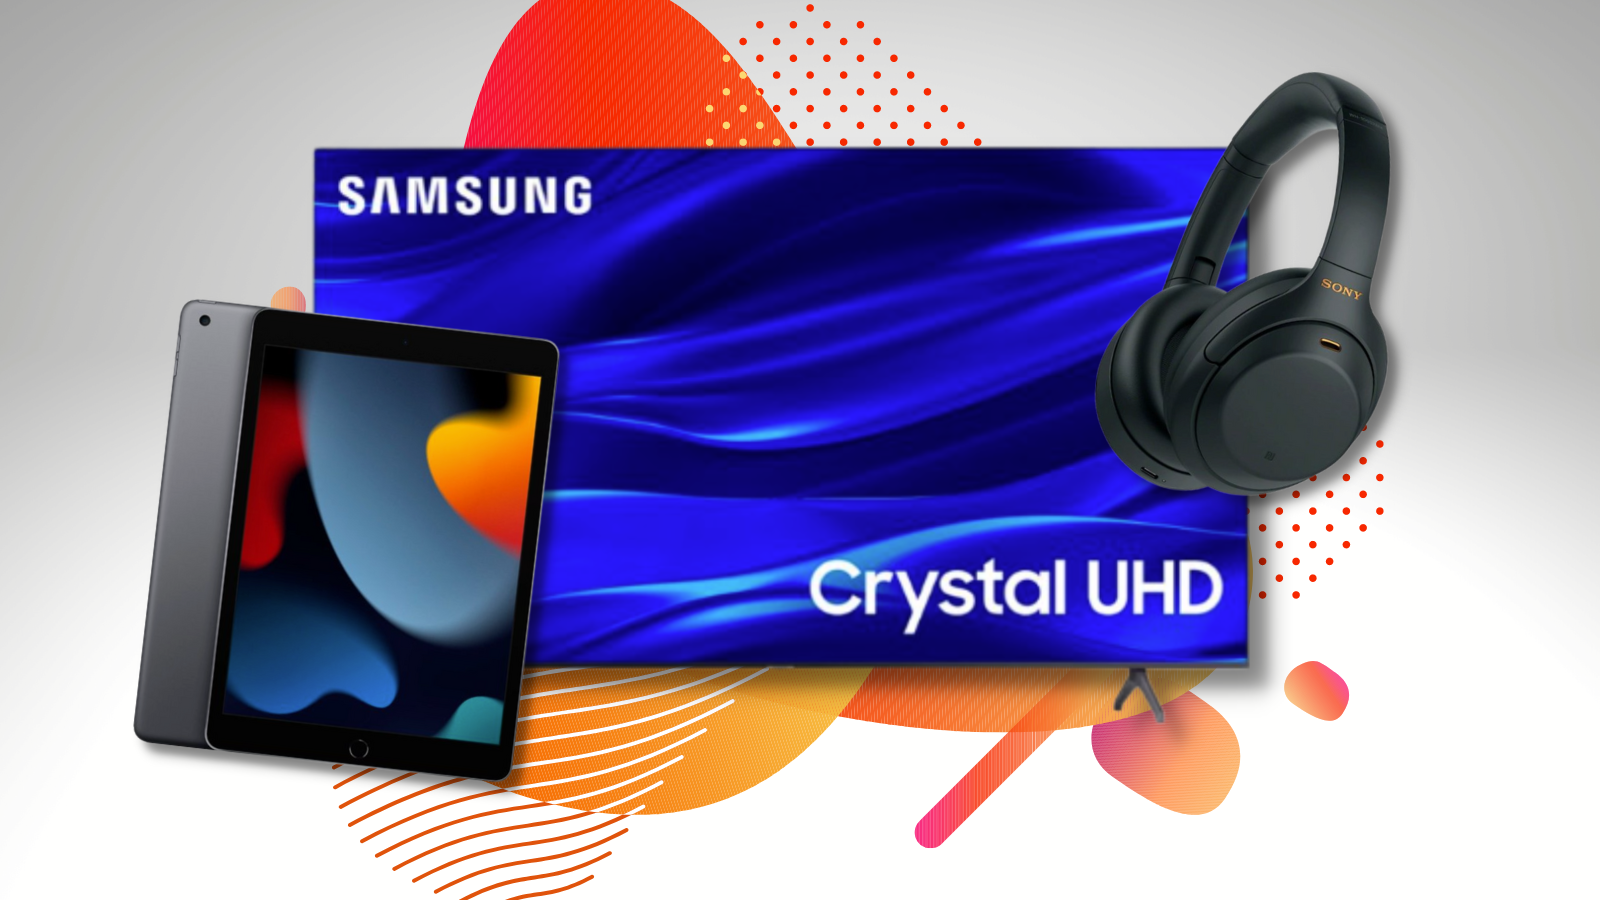 iPad, Samsung TV, and Sony headphones with colorful background